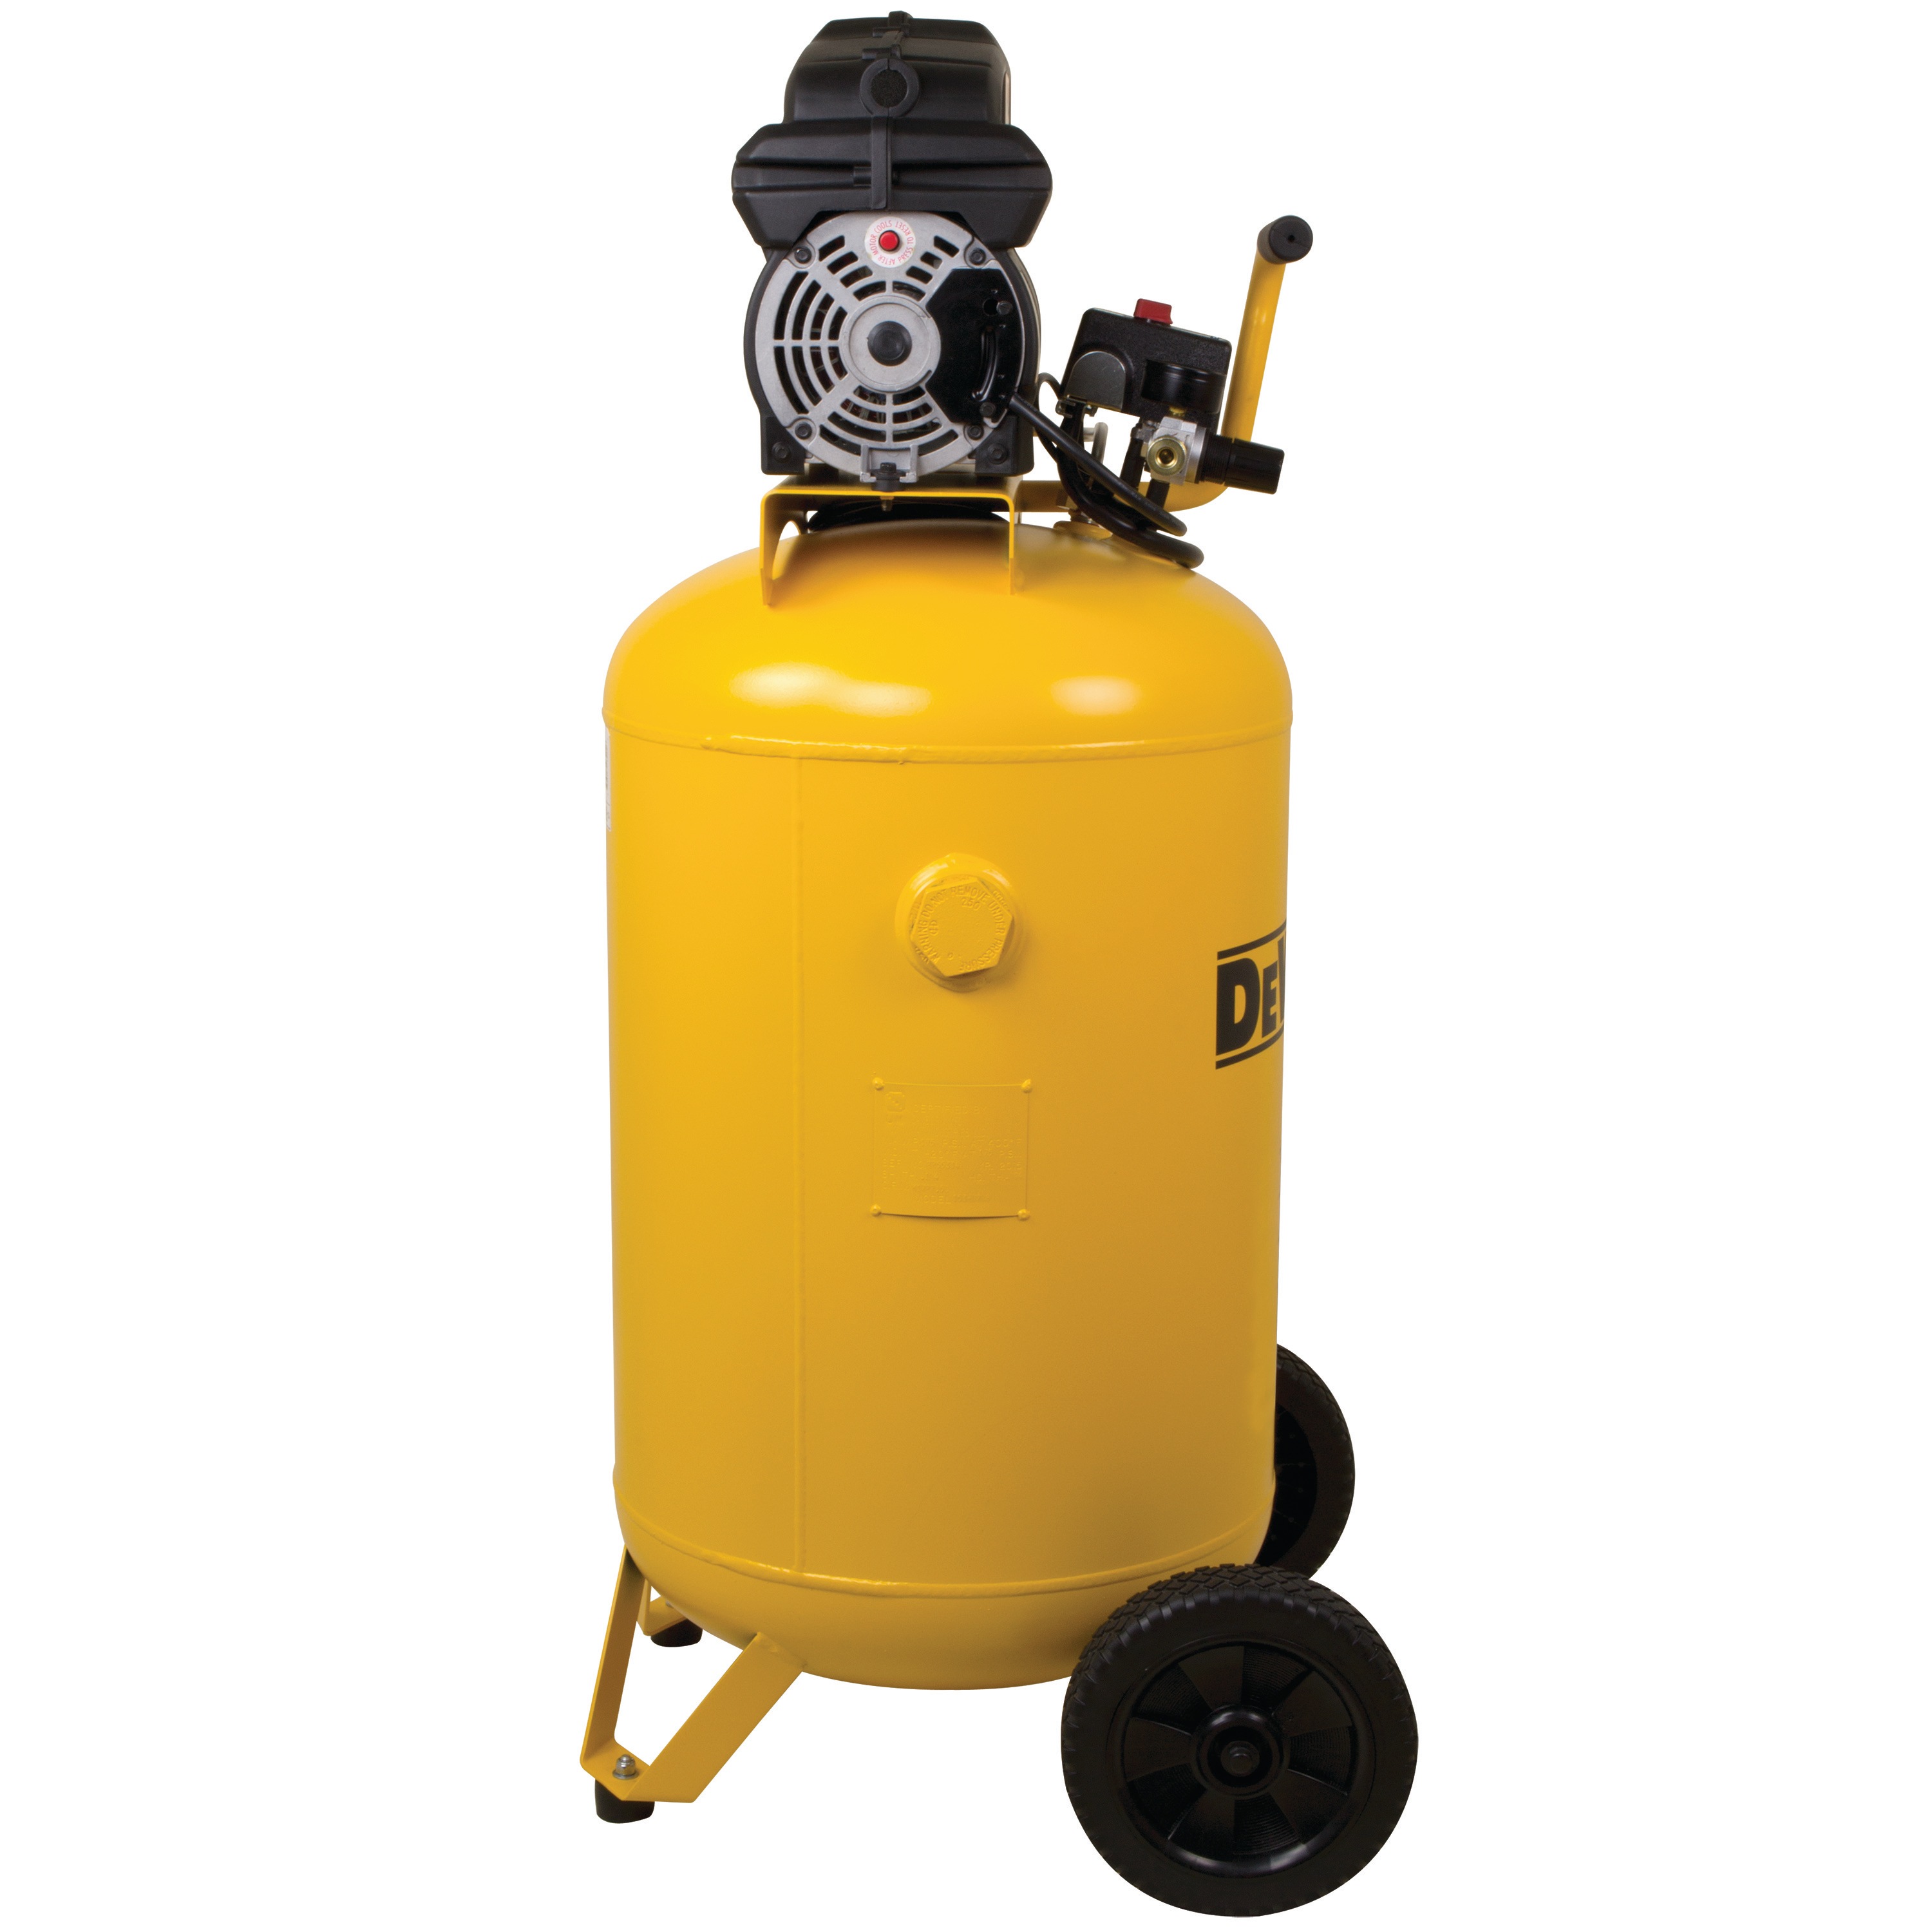 Side view of 30 gallons Portable Electric Air Compressor.